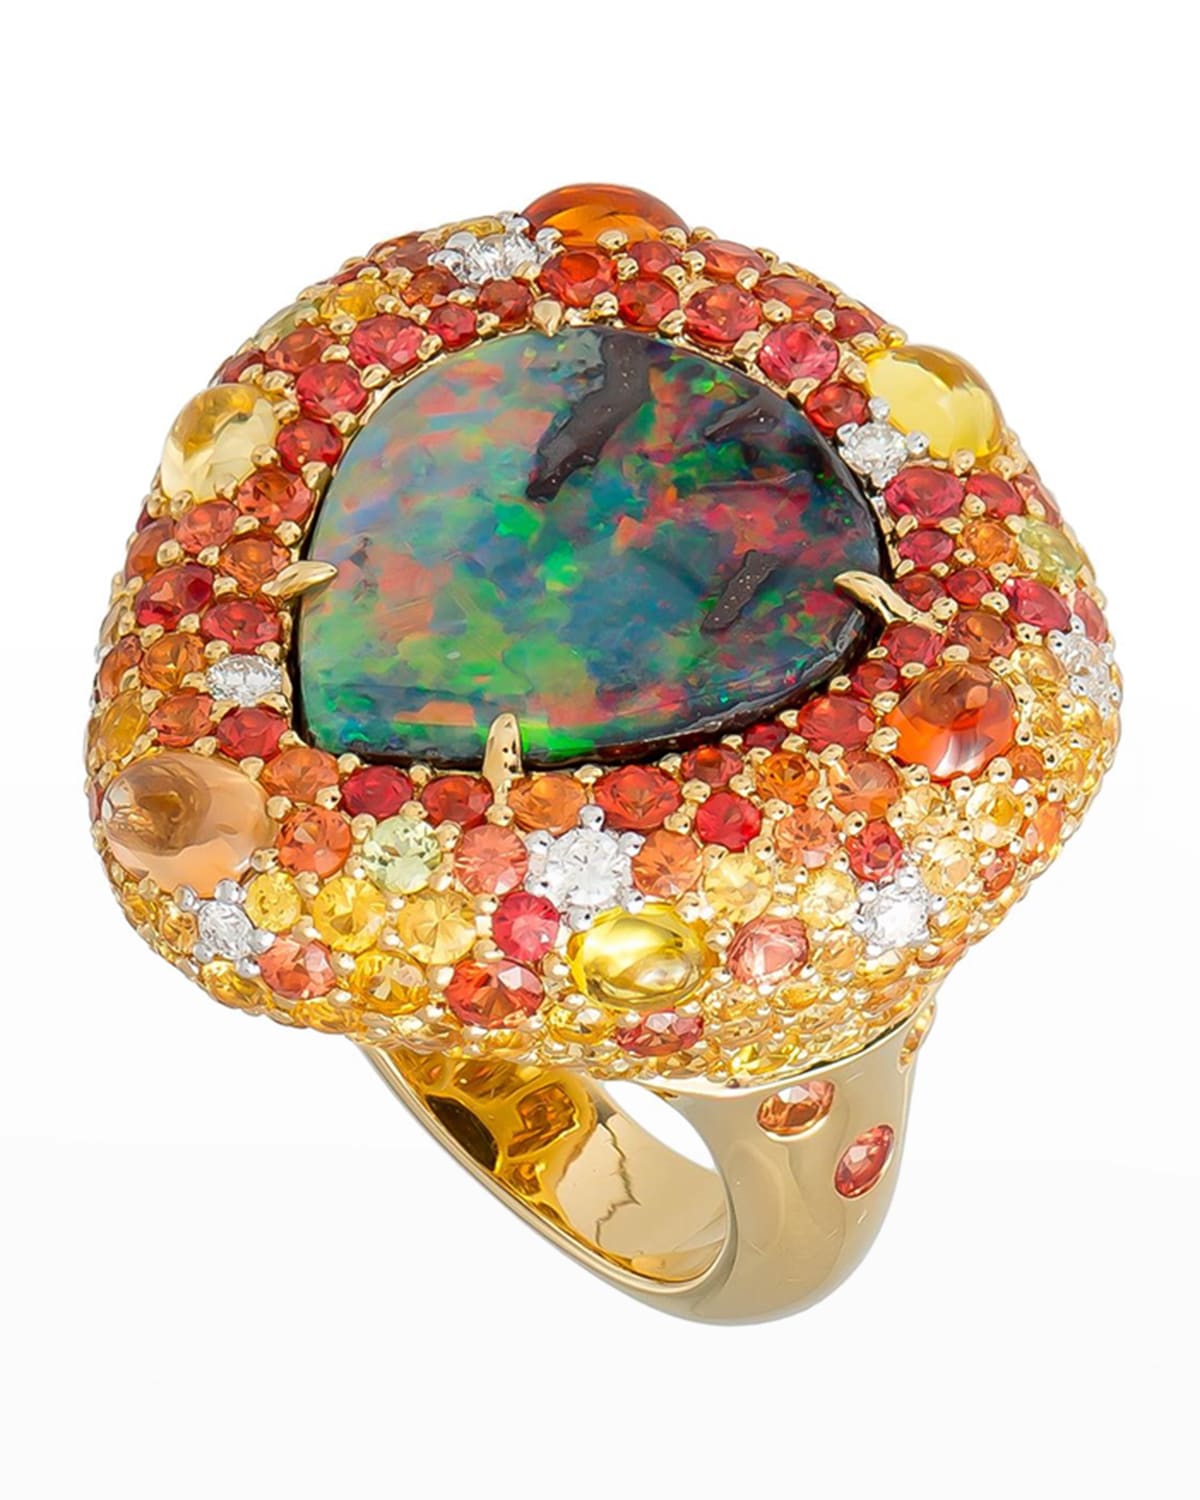 Margot McKinney Jewelry 18k Boulder Opal Pear Ring w/ Mixed Pave, Size 6.5